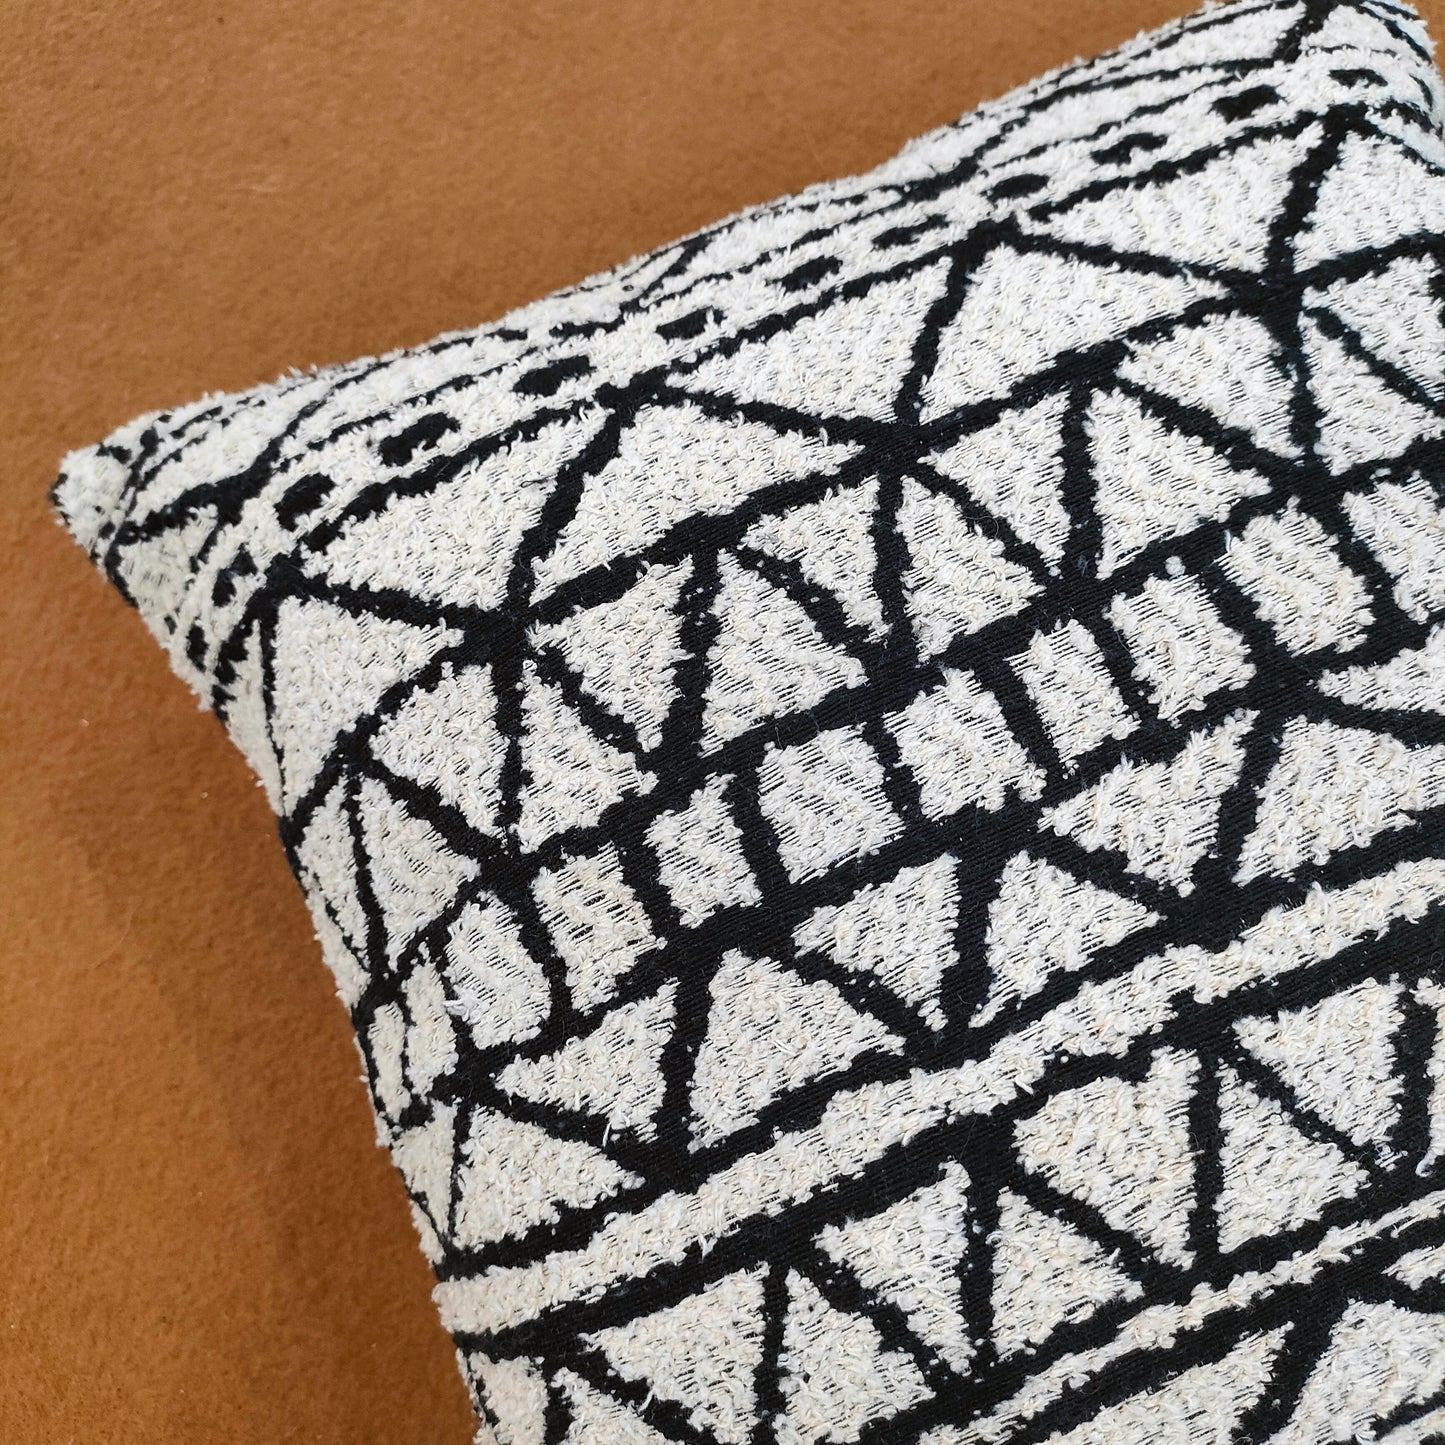 Geometric Cotton Cushion Cover | Set of 5 | 16 x 16 inches